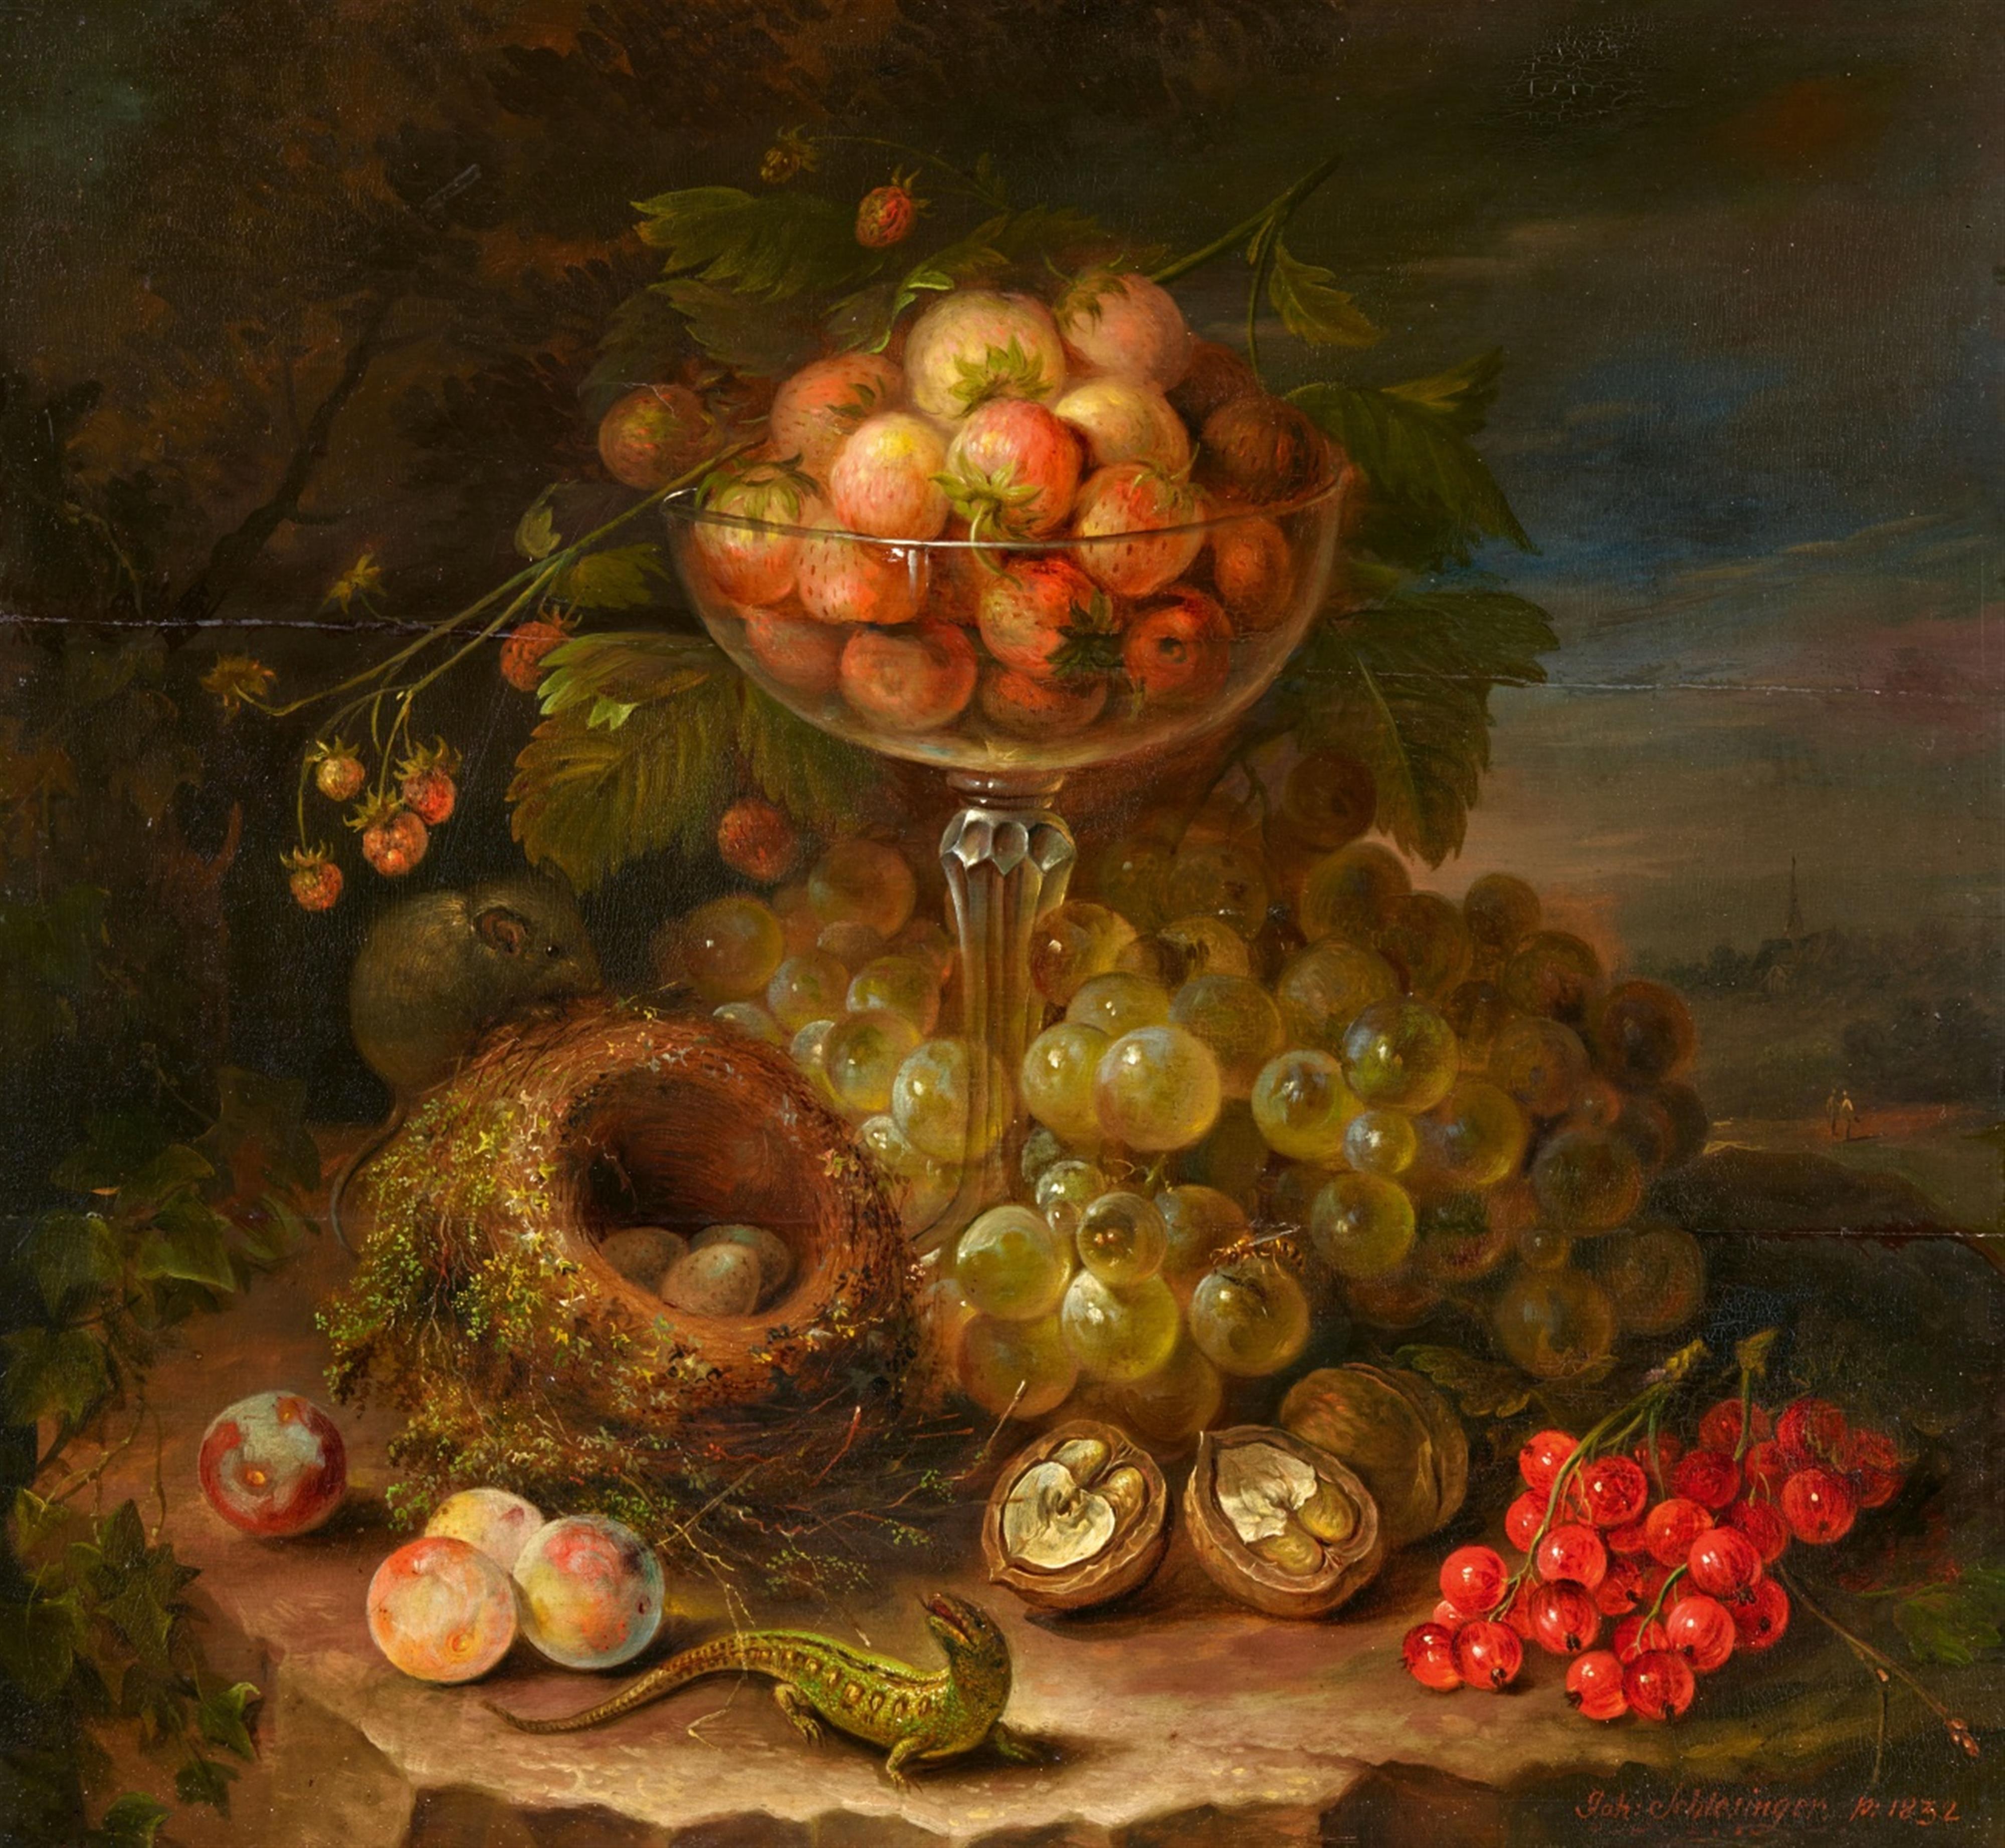 Johann Schlesinger - Still Life with Strawberries in a Glass Tazza, Grapes, Blackcurrants, Nuts, Mirabelles, a Bird's Nest, and a Lizard - image-1